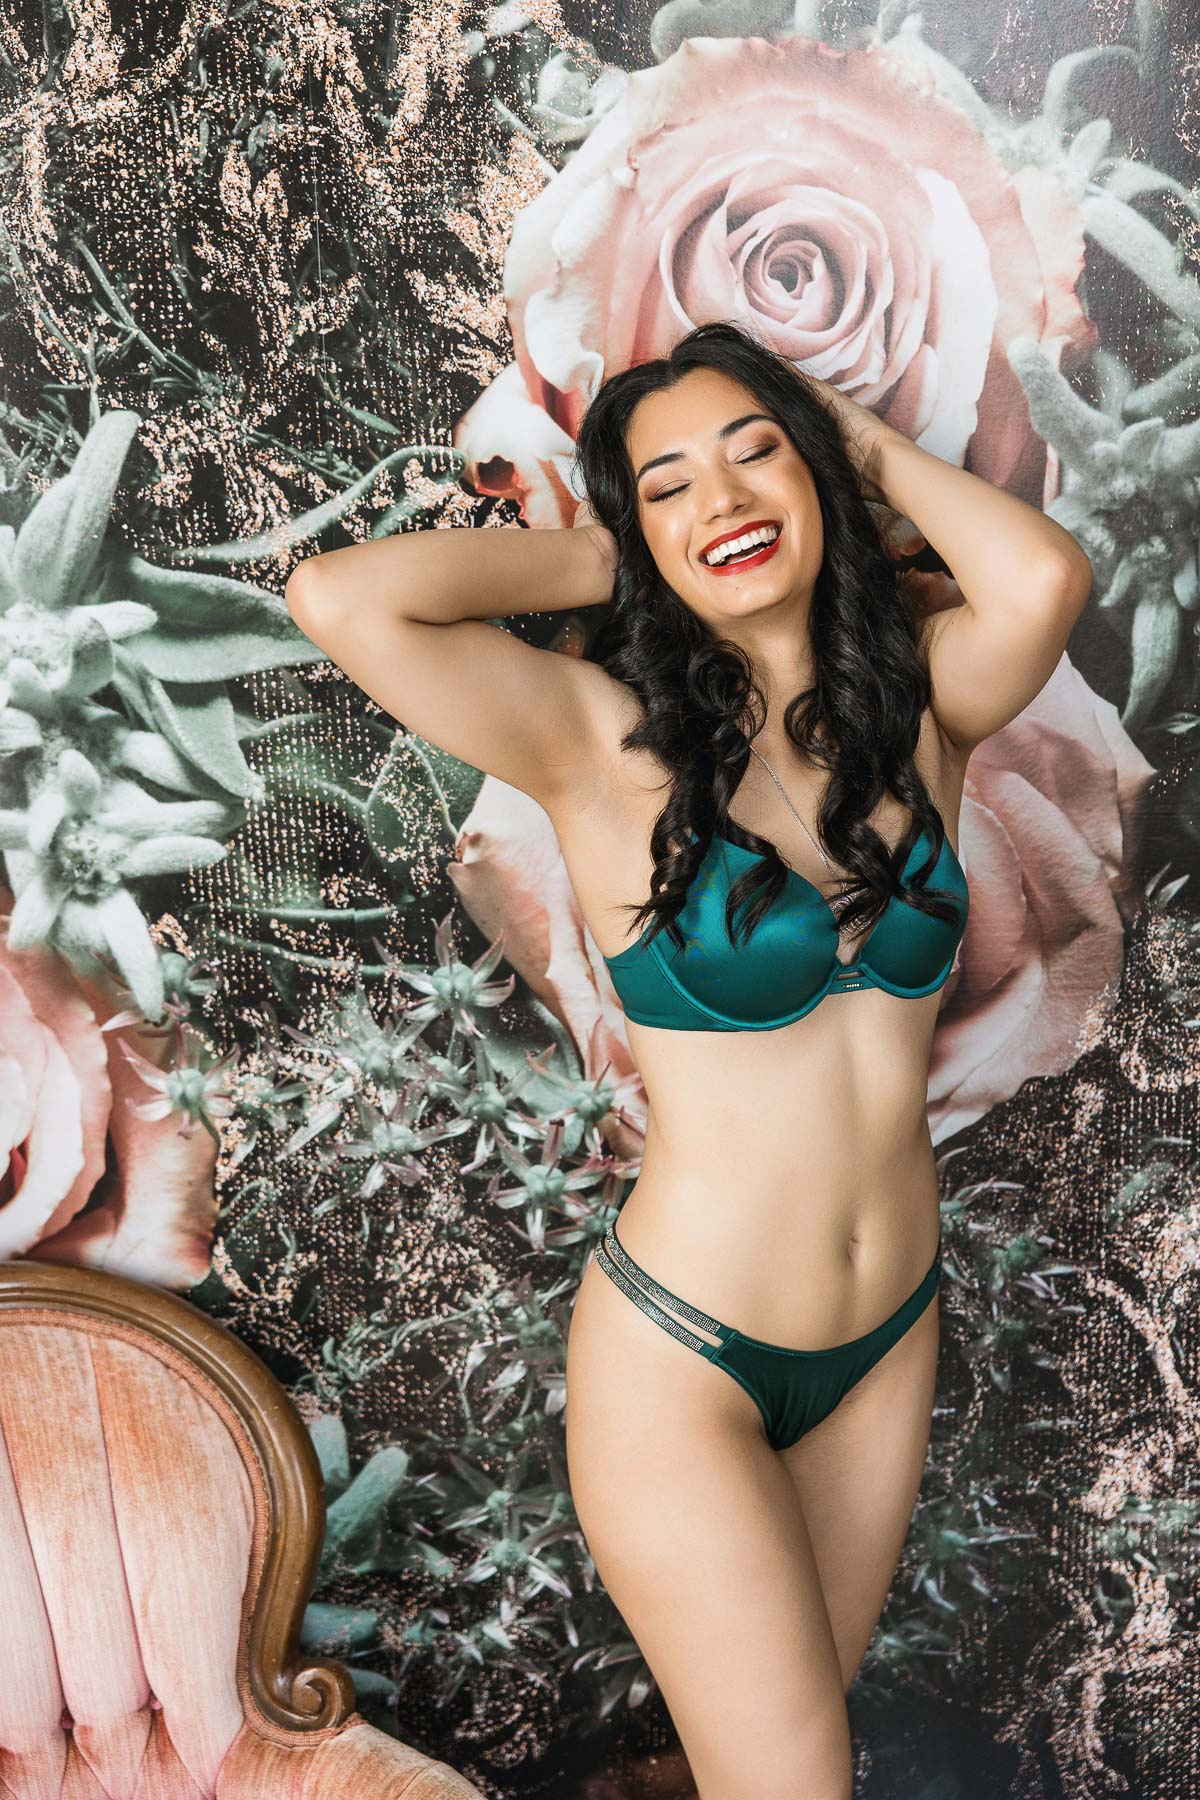 Woman in bra panty set laughing leaning up against floral wall